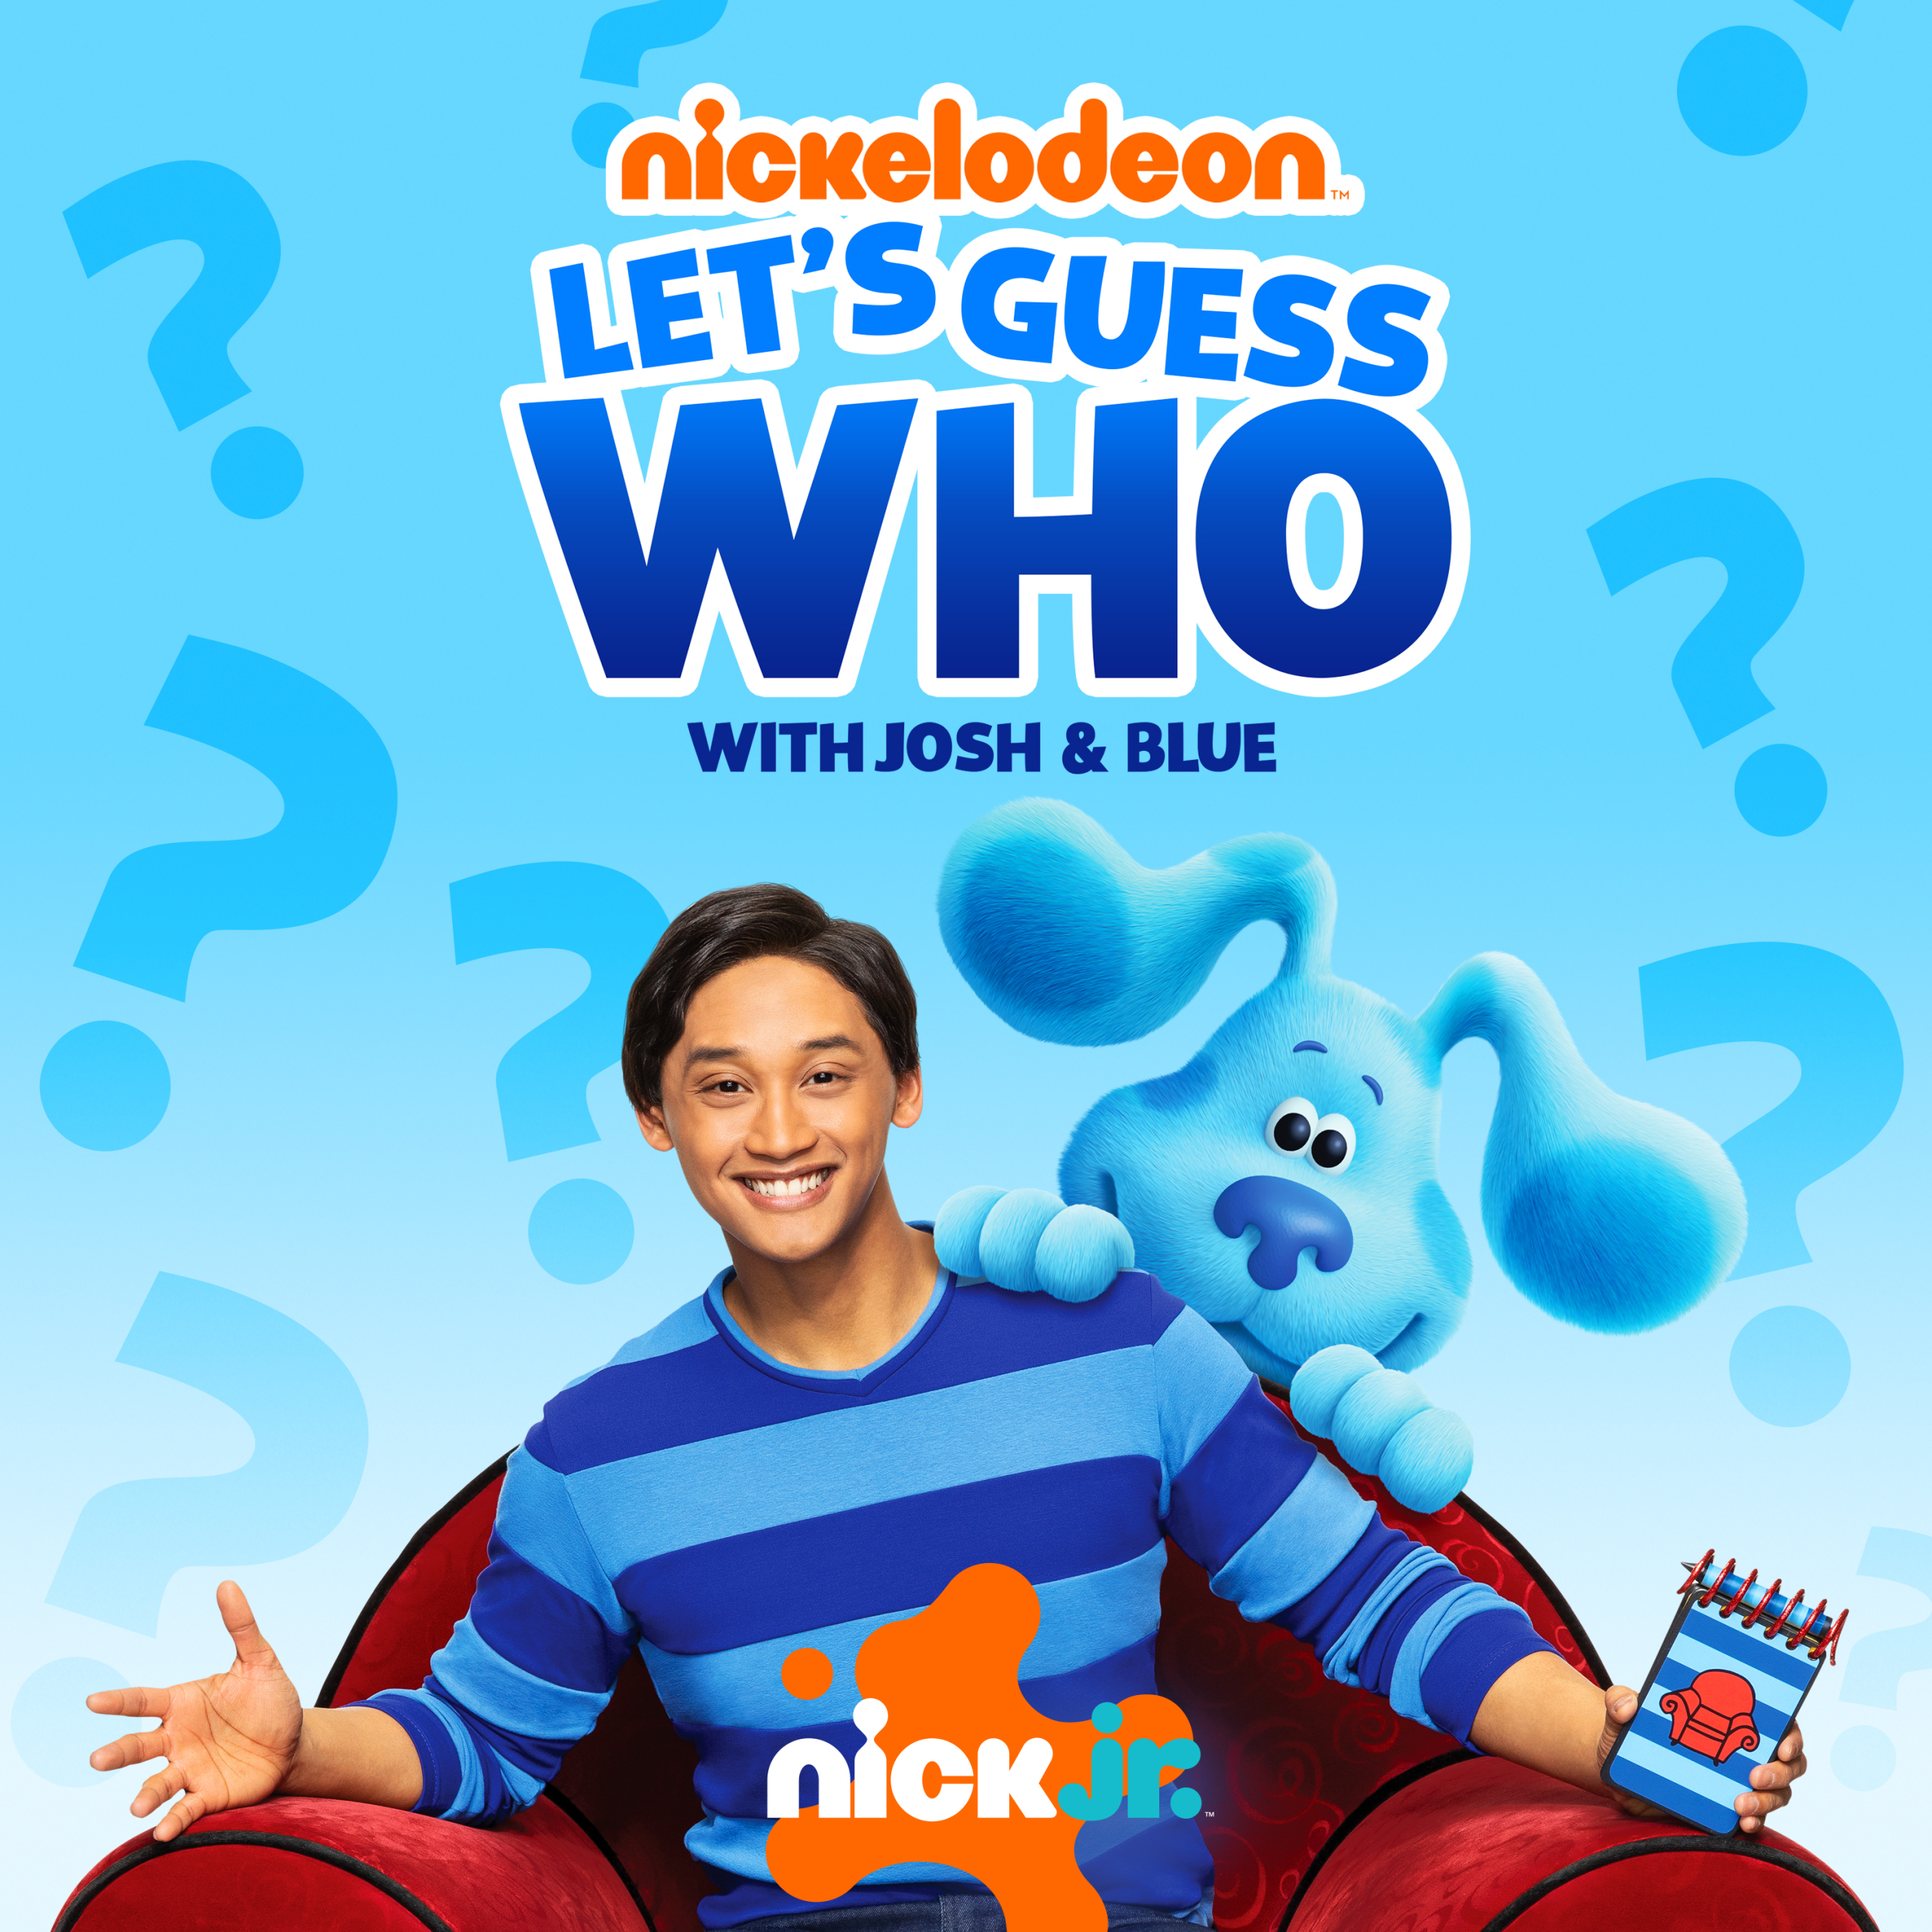 Josh and Blue from Blue's Clues & You sitting in the Thinking Chair in front of Nickelodeon Let's Guess Who podcast logo